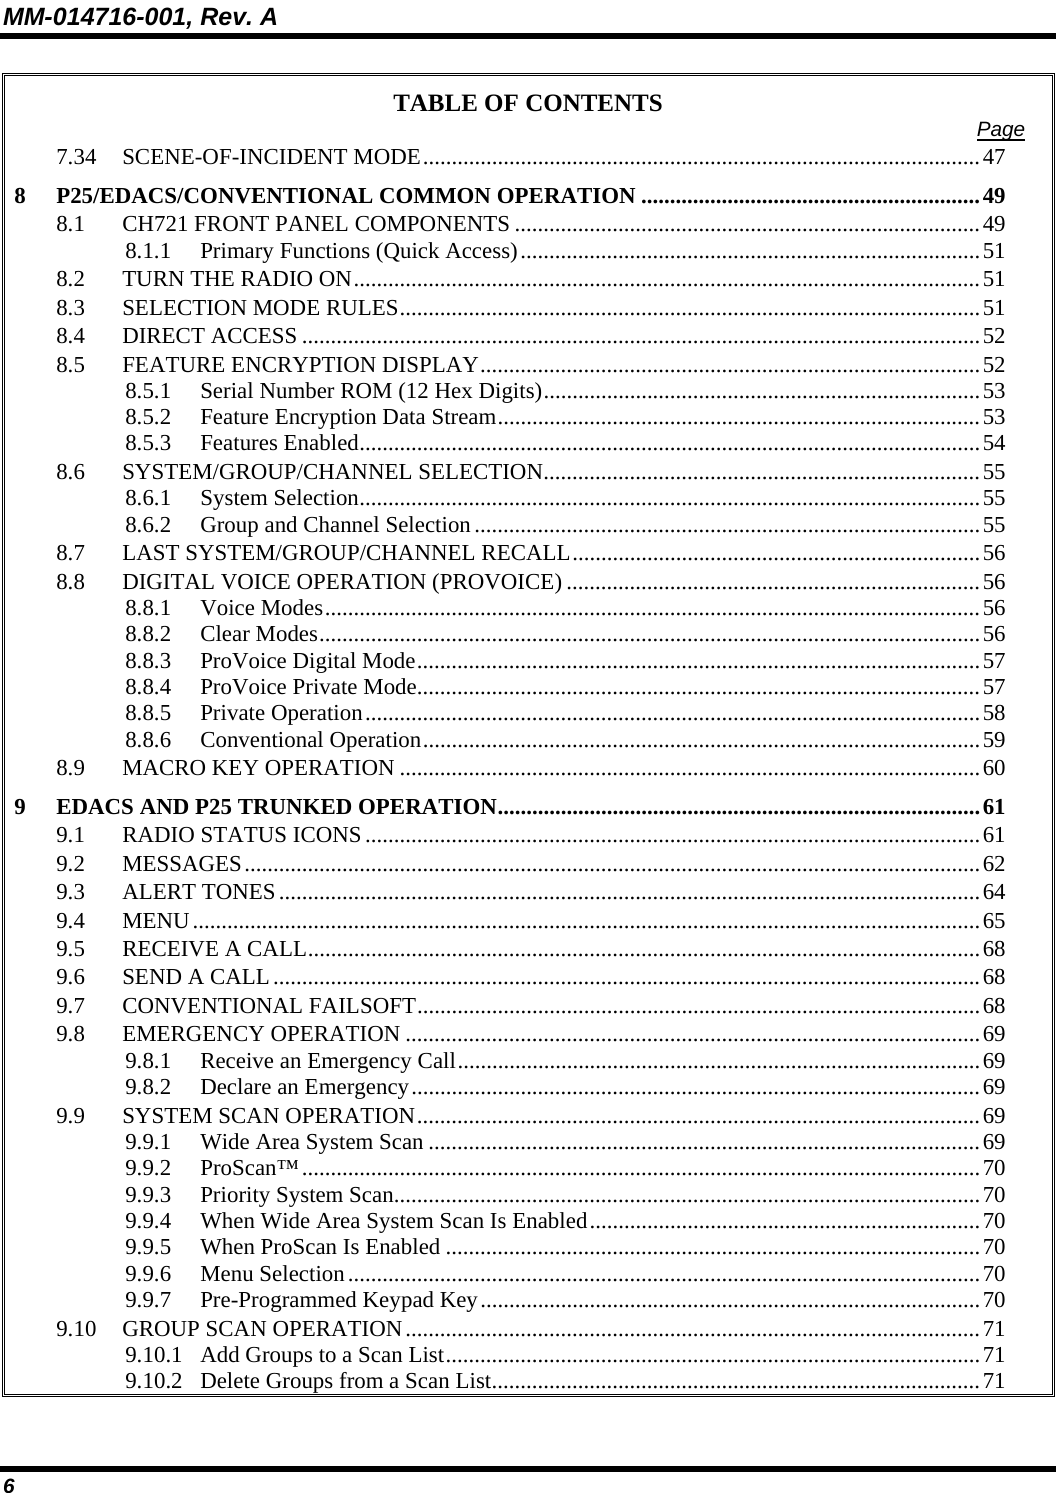 MM-014716-001, Rev. A 6 TABLE OF CONTENTS  Page 7.34 SCENE-OF-INCIDENT MODE.................................................................................................47 8 P25/EDACS/CONVENTIONAL COMMON OPERATION ...........................................................49 8.1 CH721 FRONT PANEL COMPONENTS .................................................................................49 8.1.1 Primary Functions (Quick Access)................................................................................51 8.2 TURN THE RADIO ON.............................................................................................................51 8.3 SELECTION MODE RULES.....................................................................................................51 8.4 DIRECT ACCESS ......................................................................................................................52 8.5 FEATURE ENCRYPTION DISPLAY.......................................................................................52 8.5.1 Serial Number ROM (12 Hex Digits)............................................................................53 8.5.2 Feature Encryption Data Stream....................................................................................53 8.5.3 Features Enabled............................................................................................................54 8.6 SYSTEM/GROUP/CHANNEL SELECTION............................................................................55 8.6.1 System Selection............................................................................................................55 8.6.2 Group and Channel Selection........................................................................................55 8.7 LAST SYSTEM/GROUP/CHANNEL RECALL.......................................................................56 8.8 DIGITAL VOICE OPERATION (PROVOICE) ........................................................................56 8.8.1 Voice Modes..................................................................................................................56 8.8.2 Clear Modes...................................................................................................................56 8.8.3 ProVoice Digital Mode..................................................................................................57 8.8.4 ProVoice Private Mode..................................................................................................57 8.8.5 Private Operation...........................................................................................................58 8.8.6 Conventional Operation.................................................................................................59 8.9 MACRO KEY OPERATION .....................................................................................................60 9 EDACS AND P25 TRUNKED OPERATION....................................................................................61 9.1 RADIO STATUS ICONS...........................................................................................................61 9.2 MESSAGES................................................................................................................................62 9.3 ALERT TONES..........................................................................................................................64 9.4 MENU.........................................................................................................................................65 9.5 RECEIVE A CALL.....................................................................................................................68 9.6 SEND A CALL...........................................................................................................................68 9.7 CONVENTIONAL FAILSOFT..................................................................................................68 9.8 EMERGENCY OPERATION ....................................................................................................69 9.8.1 Receive an Emergency Call...........................................................................................69 9.8.2 Declare an Emergency...................................................................................................69 9.9 SYSTEM SCAN OPERATION..................................................................................................69 9.9.1 Wide Area System Scan ................................................................................................69 9.9.2 ProScan™......................................................................................................................70 9.9.3 Priority System Scan......................................................................................................70 9.9.4 When Wide Area System Scan Is Enabled....................................................................70 9.9.5 When ProScan Is Enabled .............................................................................................70 9.9.6 Menu Selection..............................................................................................................70 9.9.7 Pre-Programmed Keypad Key.......................................................................................70 9.10 GROUP SCAN OPERATION....................................................................................................71 9.10.1 Add Groups to a Scan List.............................................................................................71 9.10.2 Delete Groups from a Scan List.....................................................................................71 